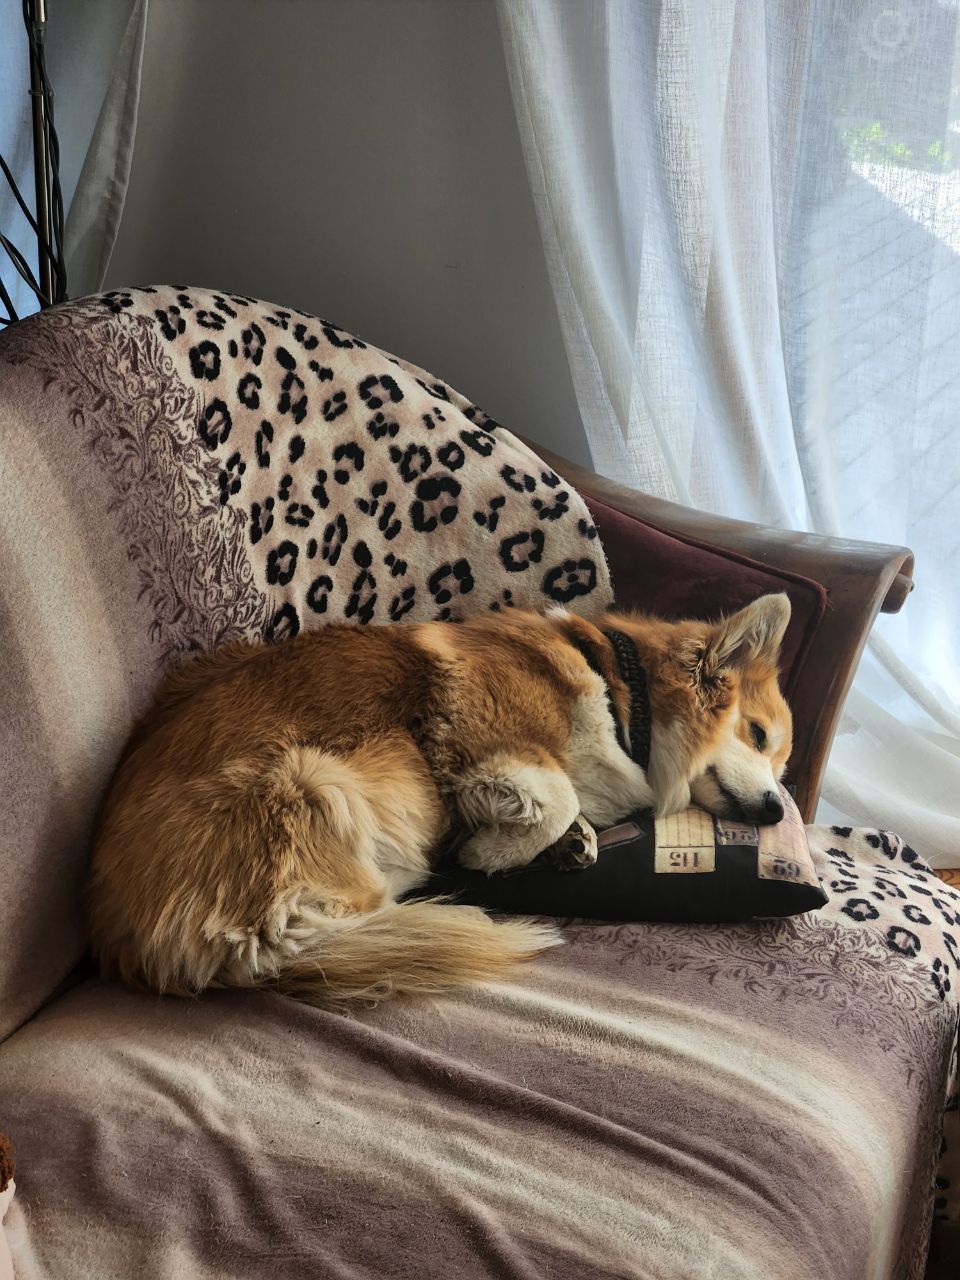 Corgi on the couch